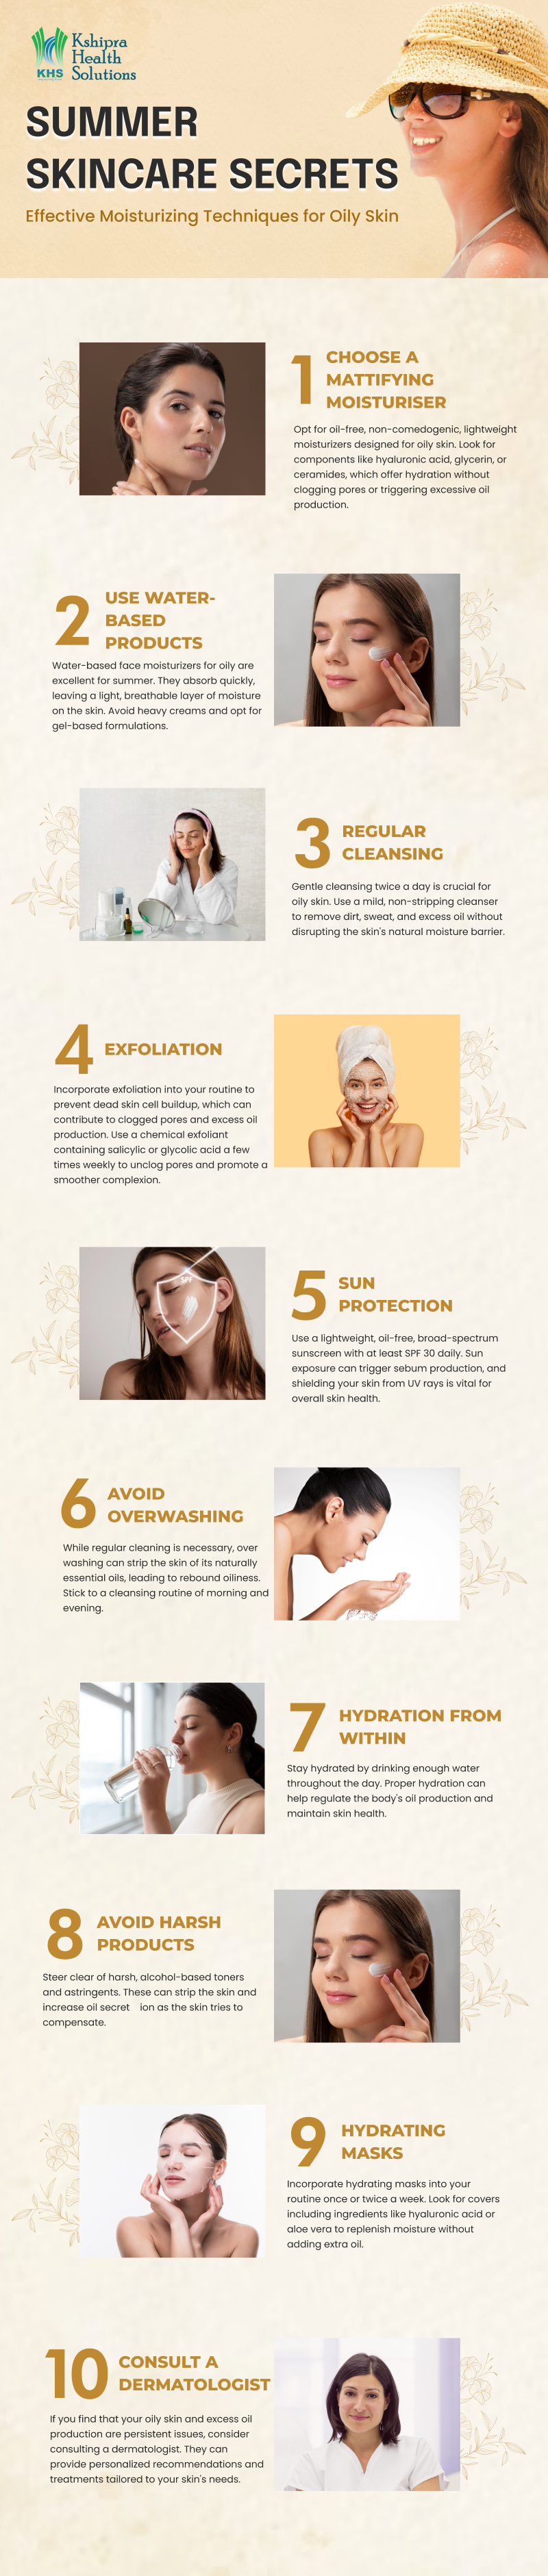 best face moisturizer for oily skin infographic